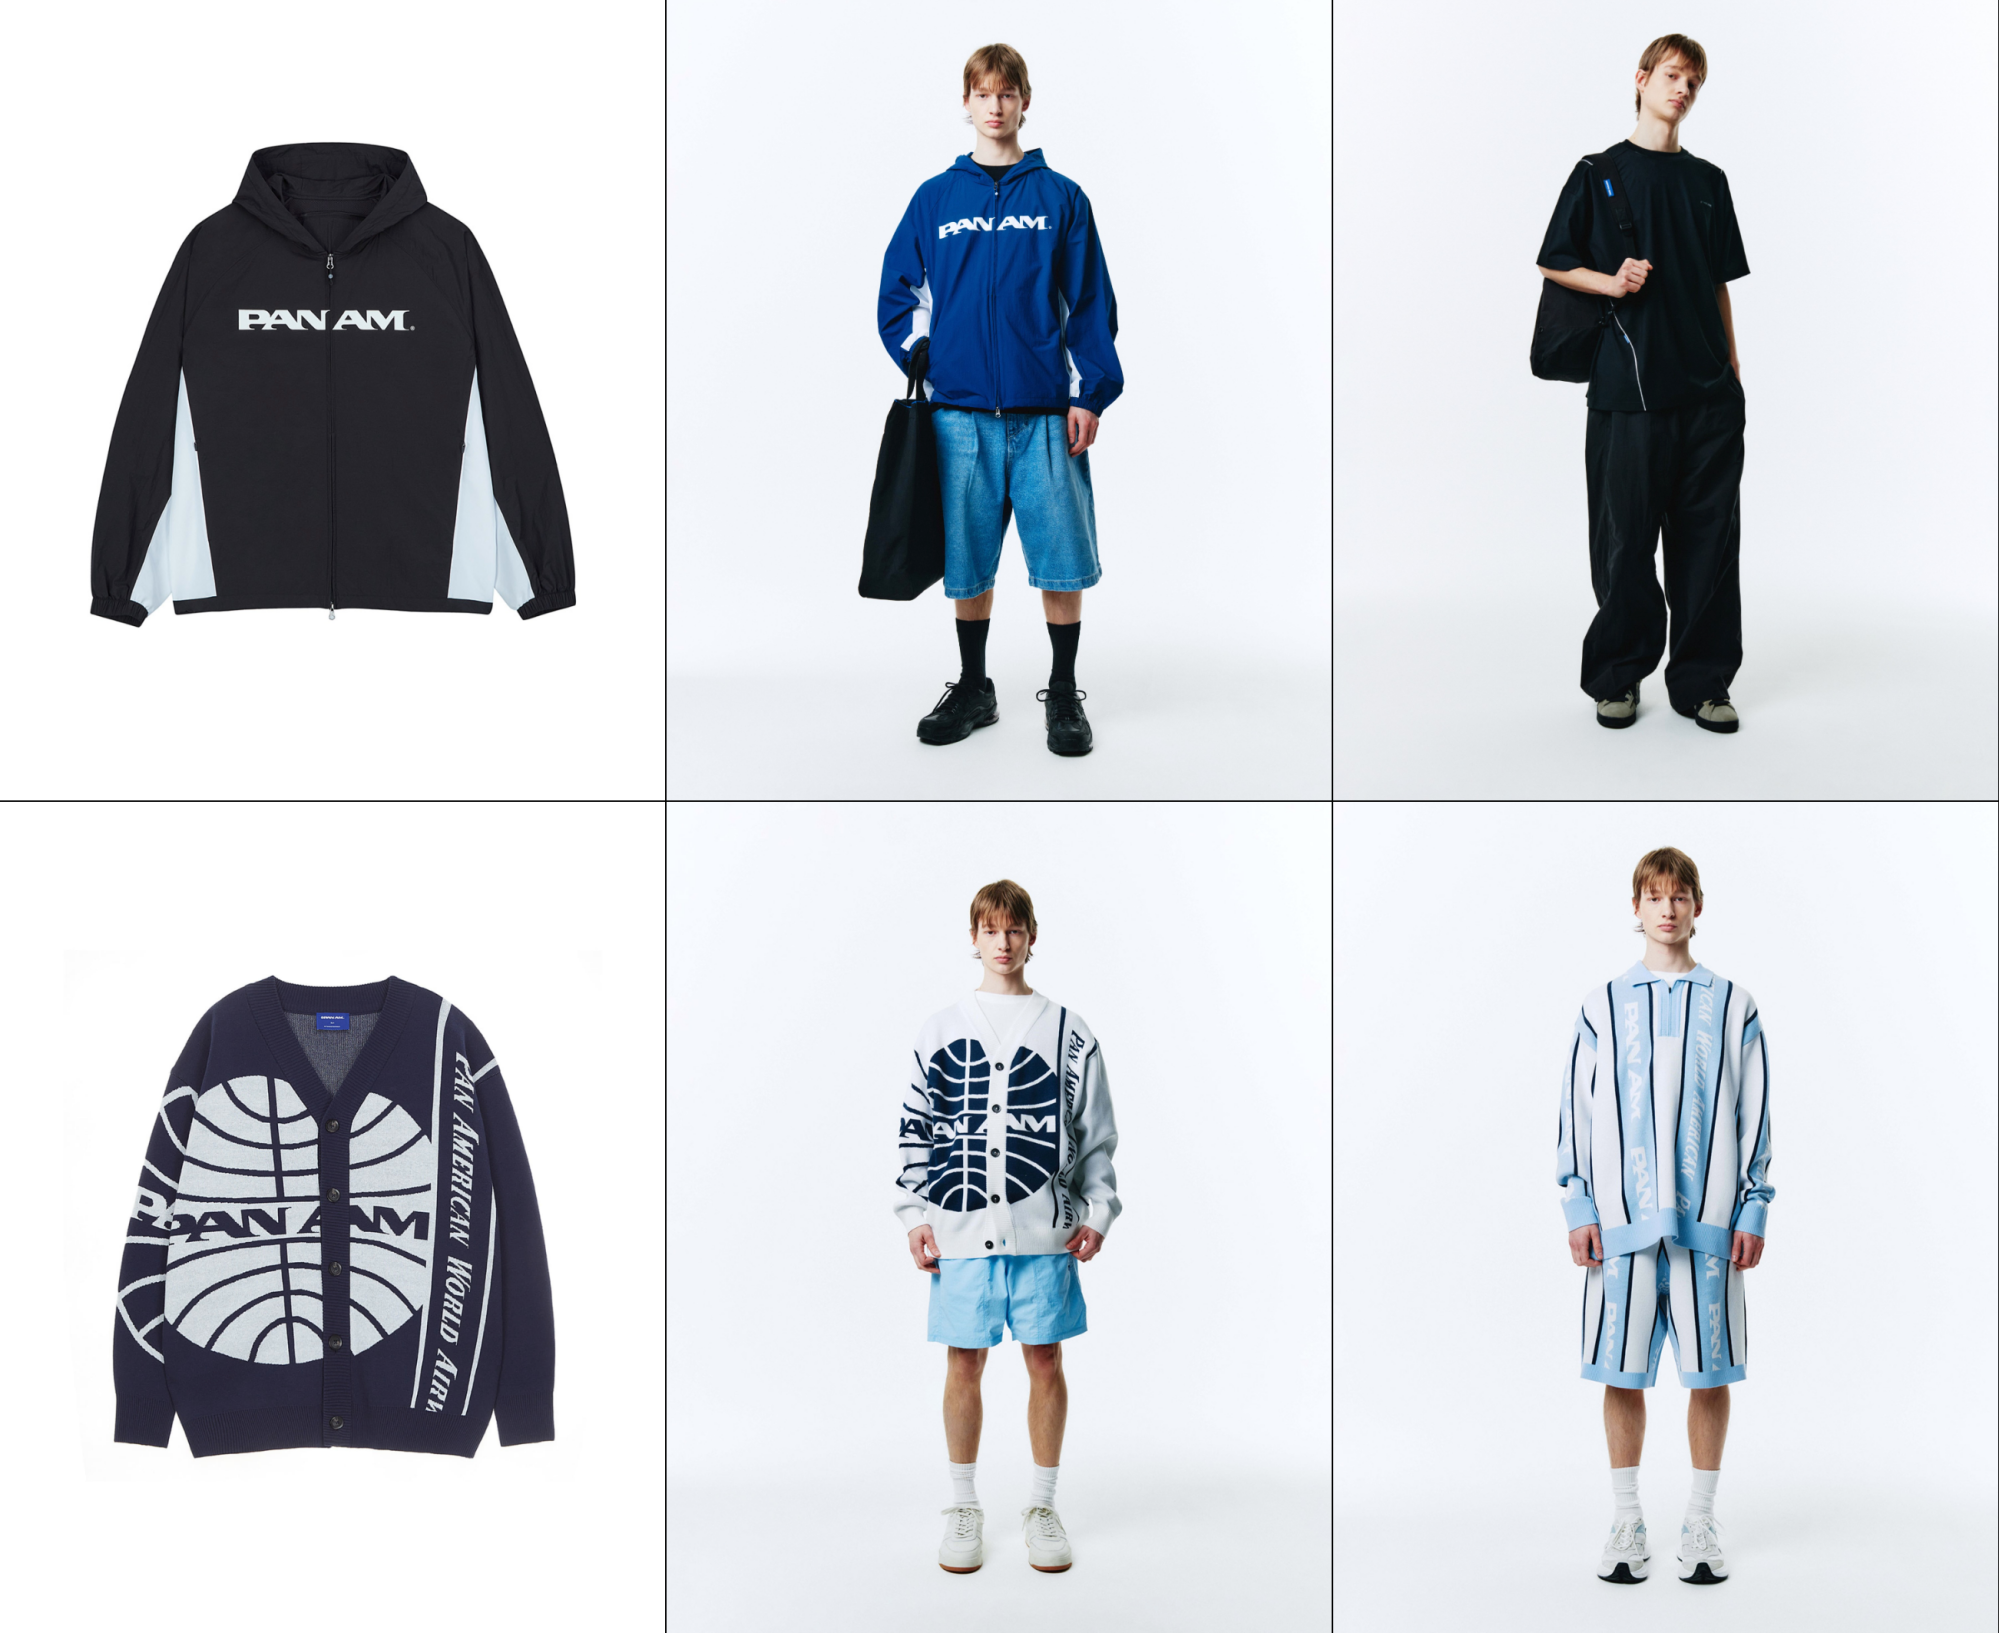 Site listings for PanAm streetwear, including sweatshirts and cardigans.